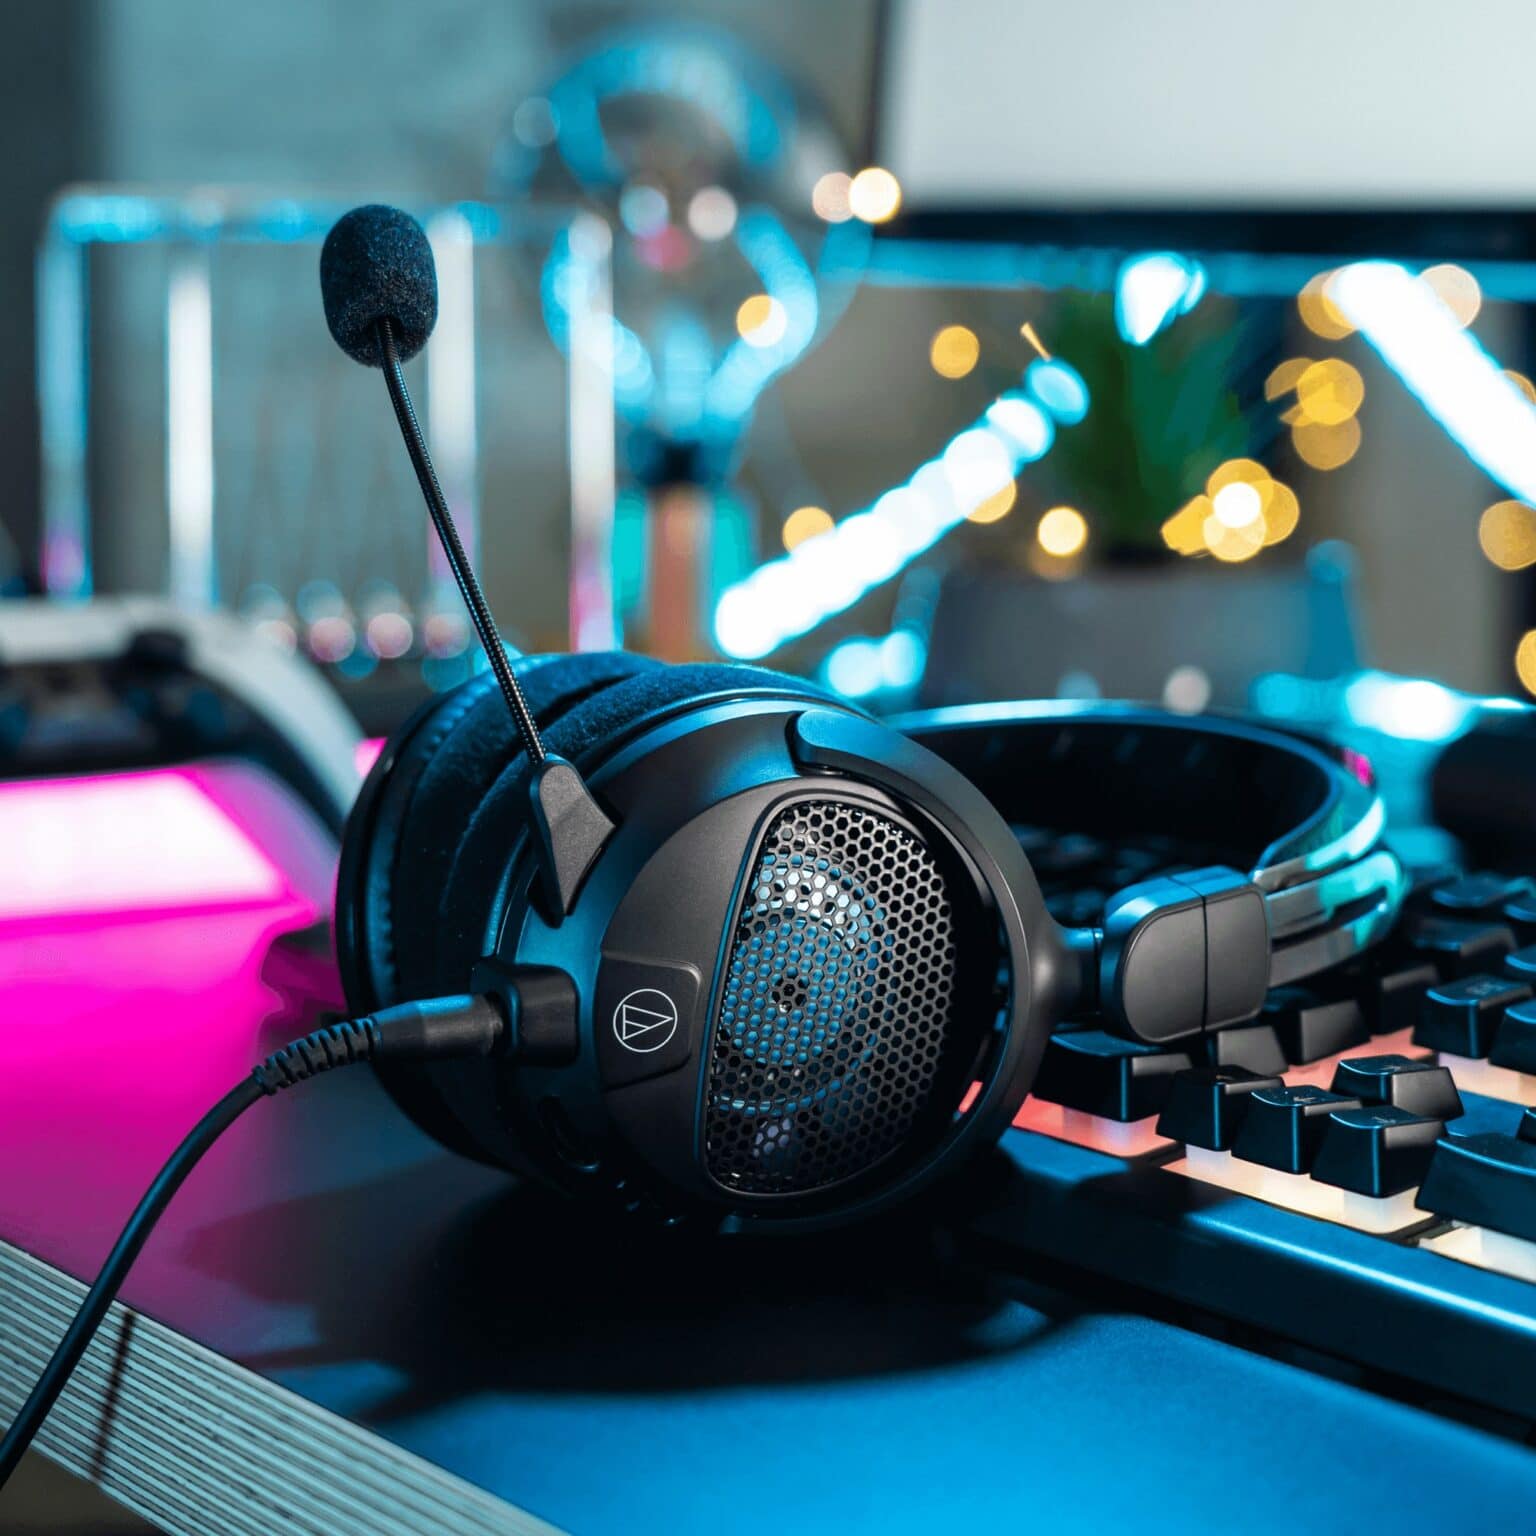 The new Audio-Technica ATH-GDL3 gaming headset features an open-back design. The ATH-GL3 gaming headset features a closed-back design (not pictured).